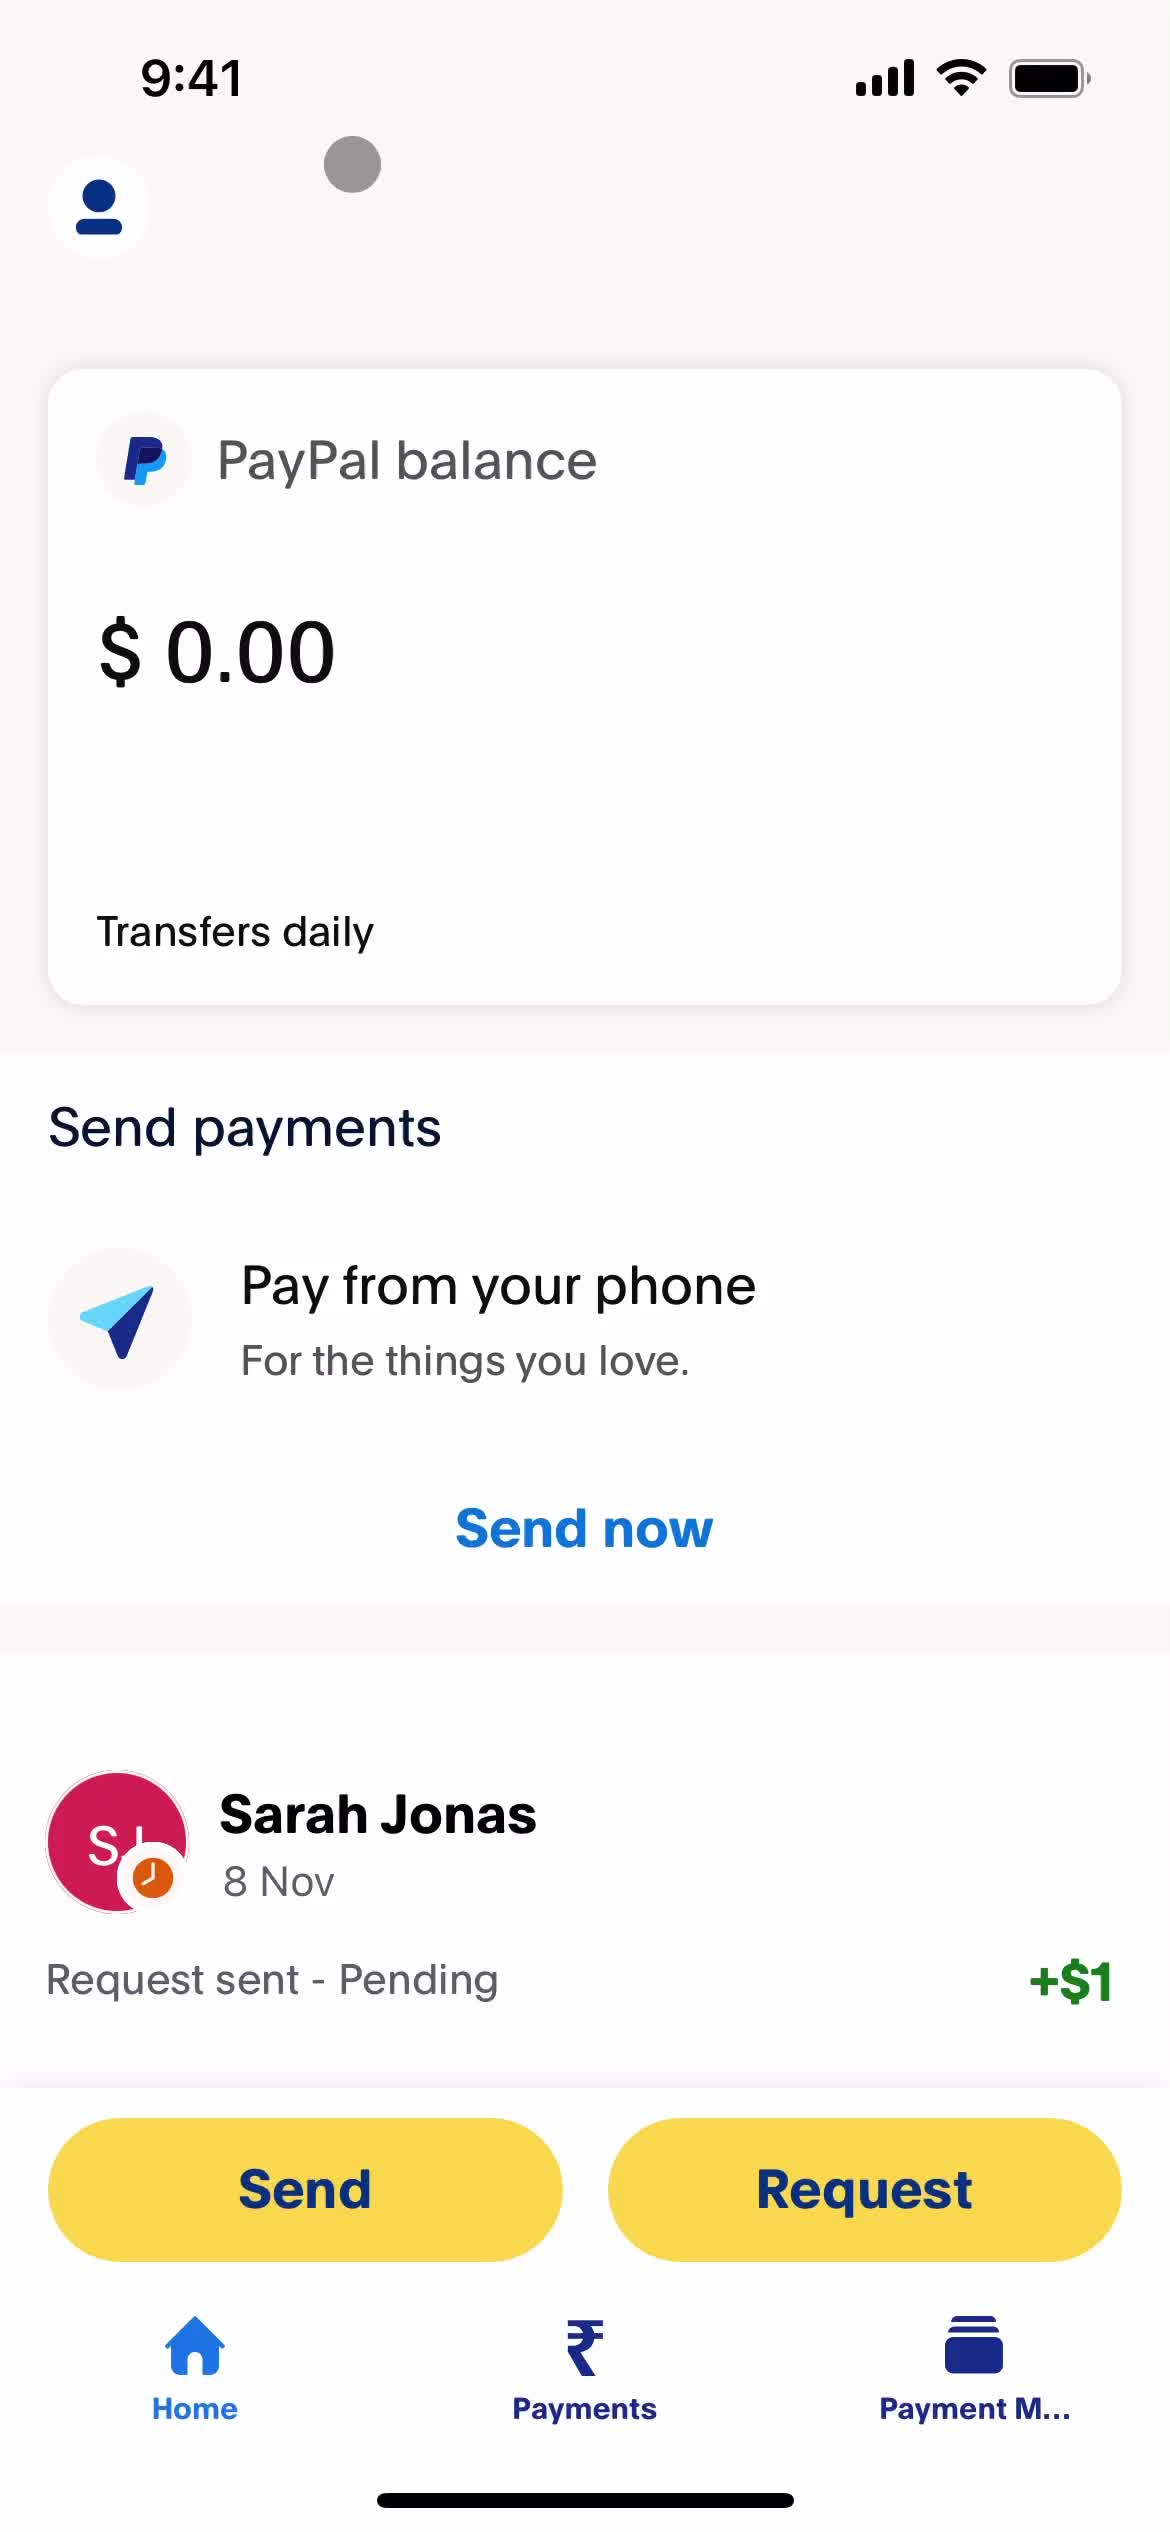 Screenshot of Home on Requesting payment on PayPal user flow